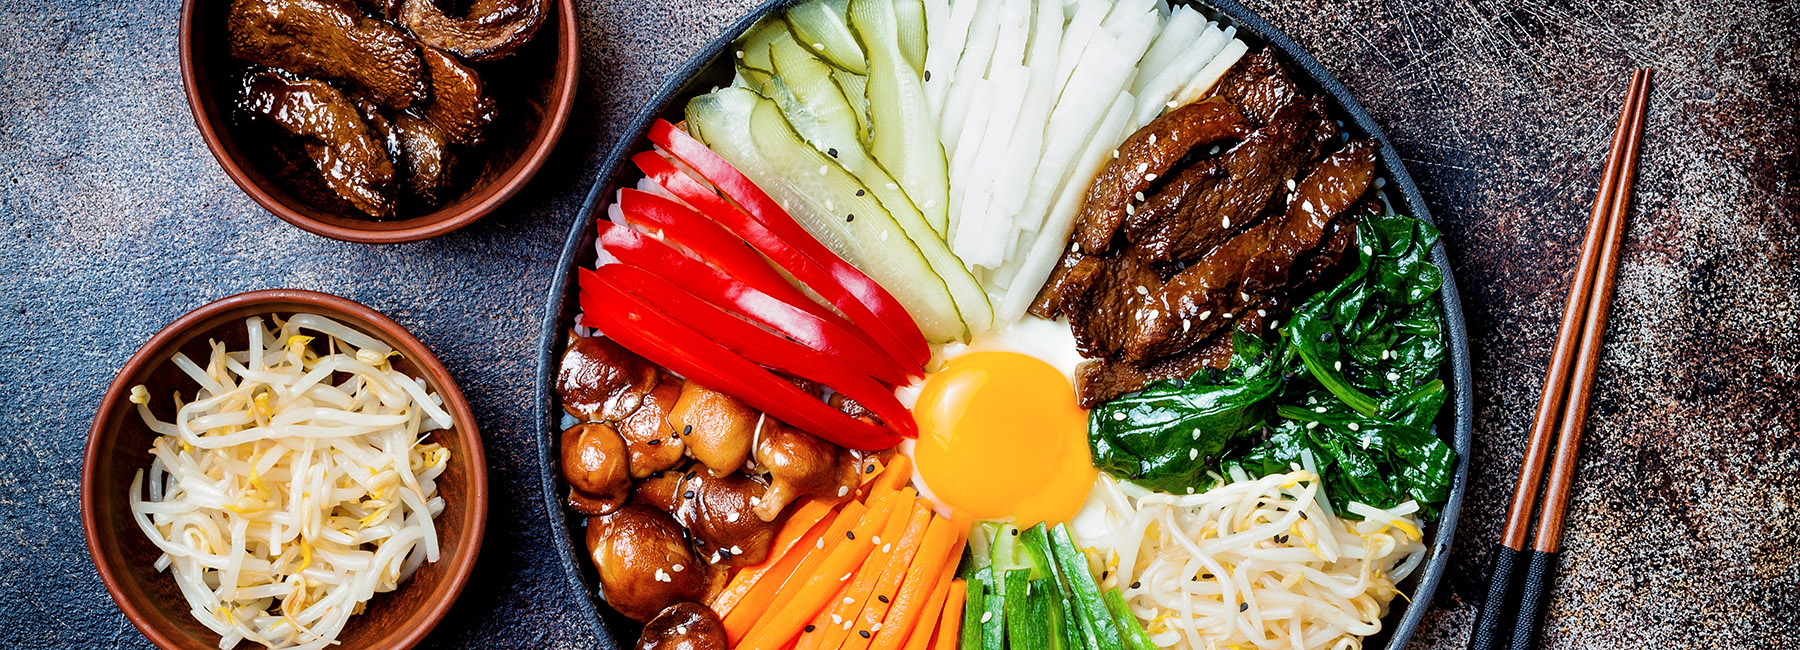 a plate of Bibimbap, a traditional Korean dish of rice with vegetables and beef